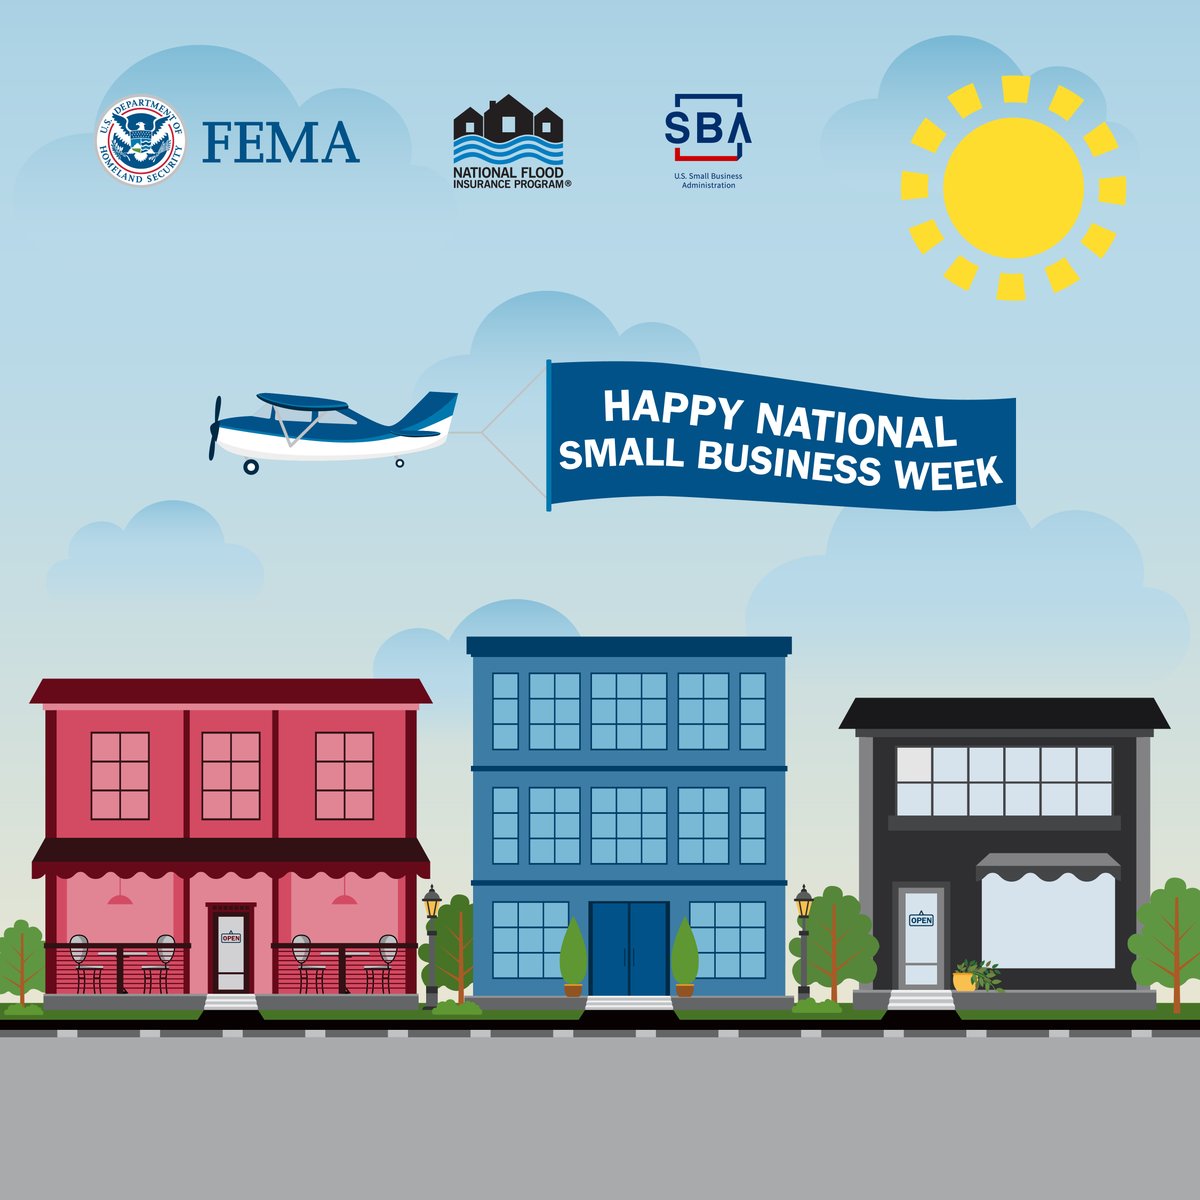 Small businesses are a key part of our economy. This #SmallBusinessWeek, we partnered with @SBAgov to recognize the entrepreneurial spirit of business owners and the incredible work of insurance agents that help protect the lives of from the dangers of flooding.